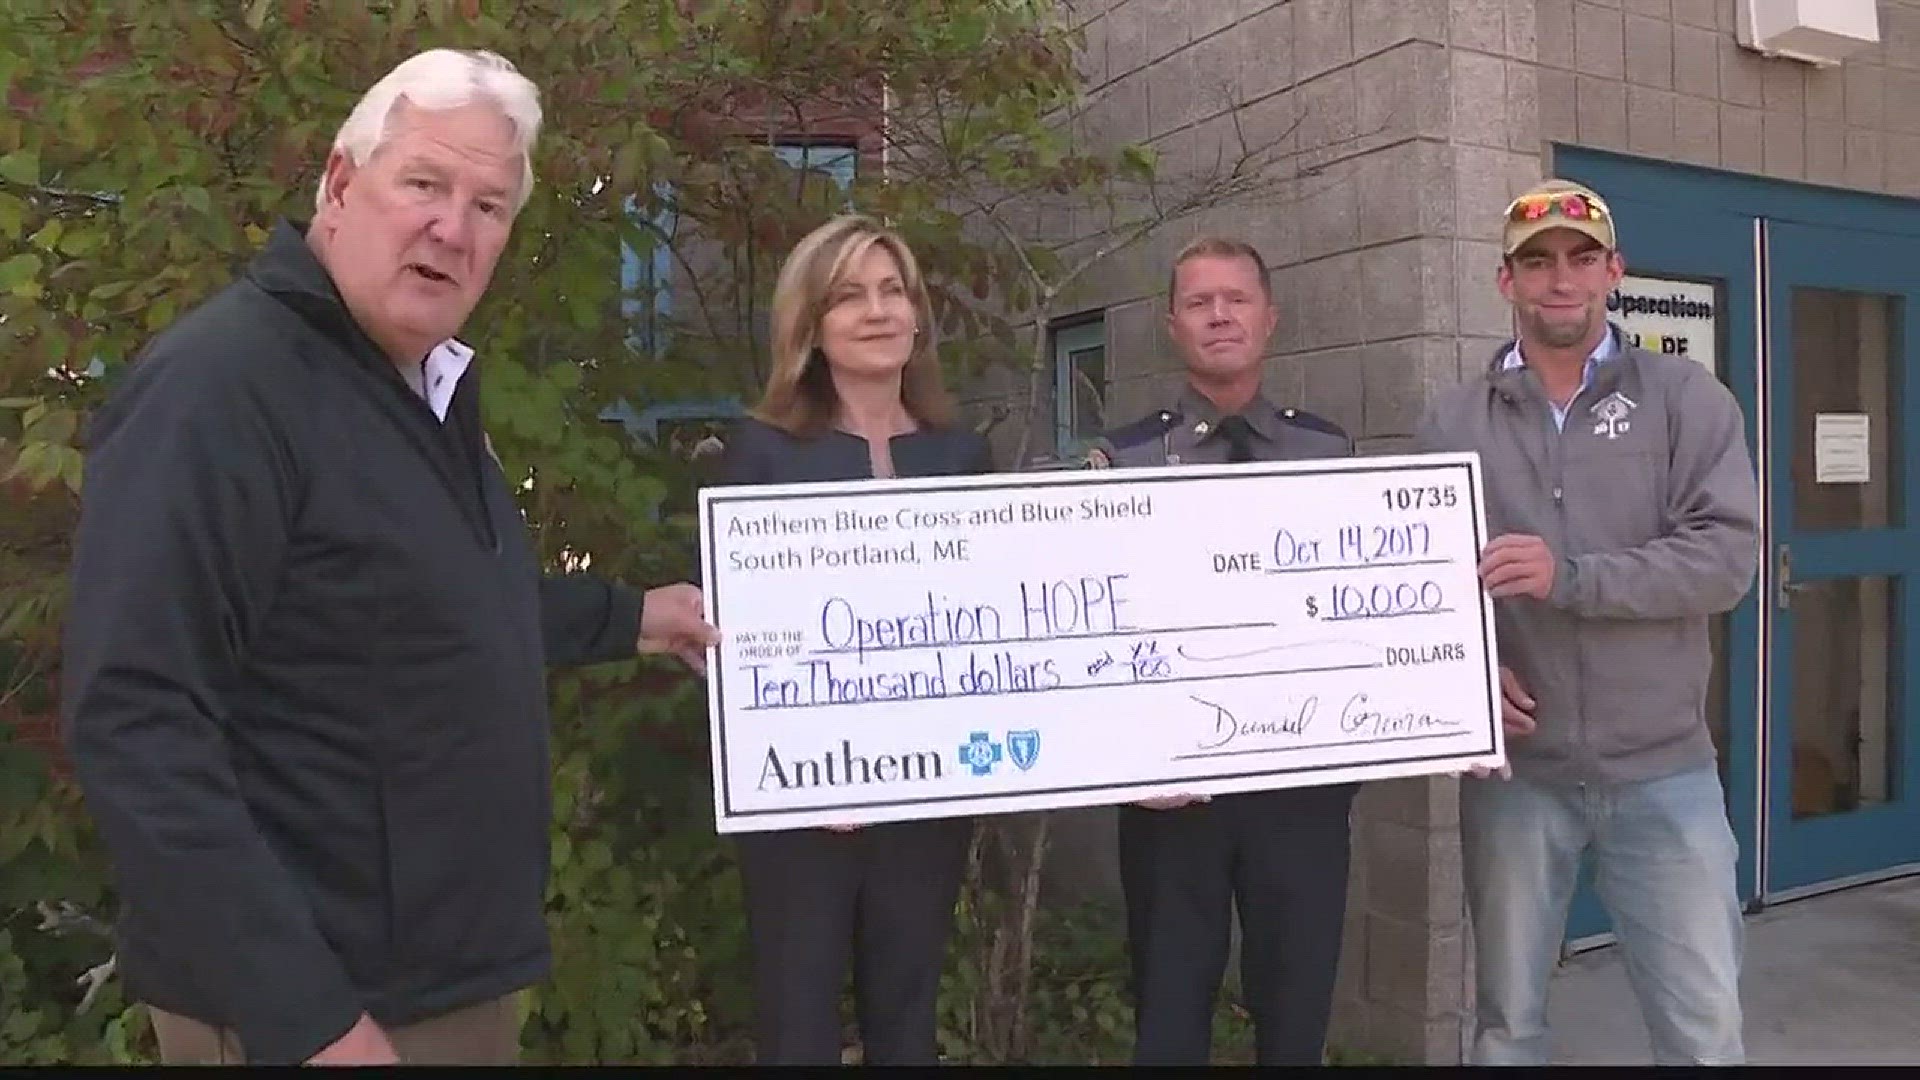 Anthem presents a donation of $10,000 to Scarborough's Operation HOPE